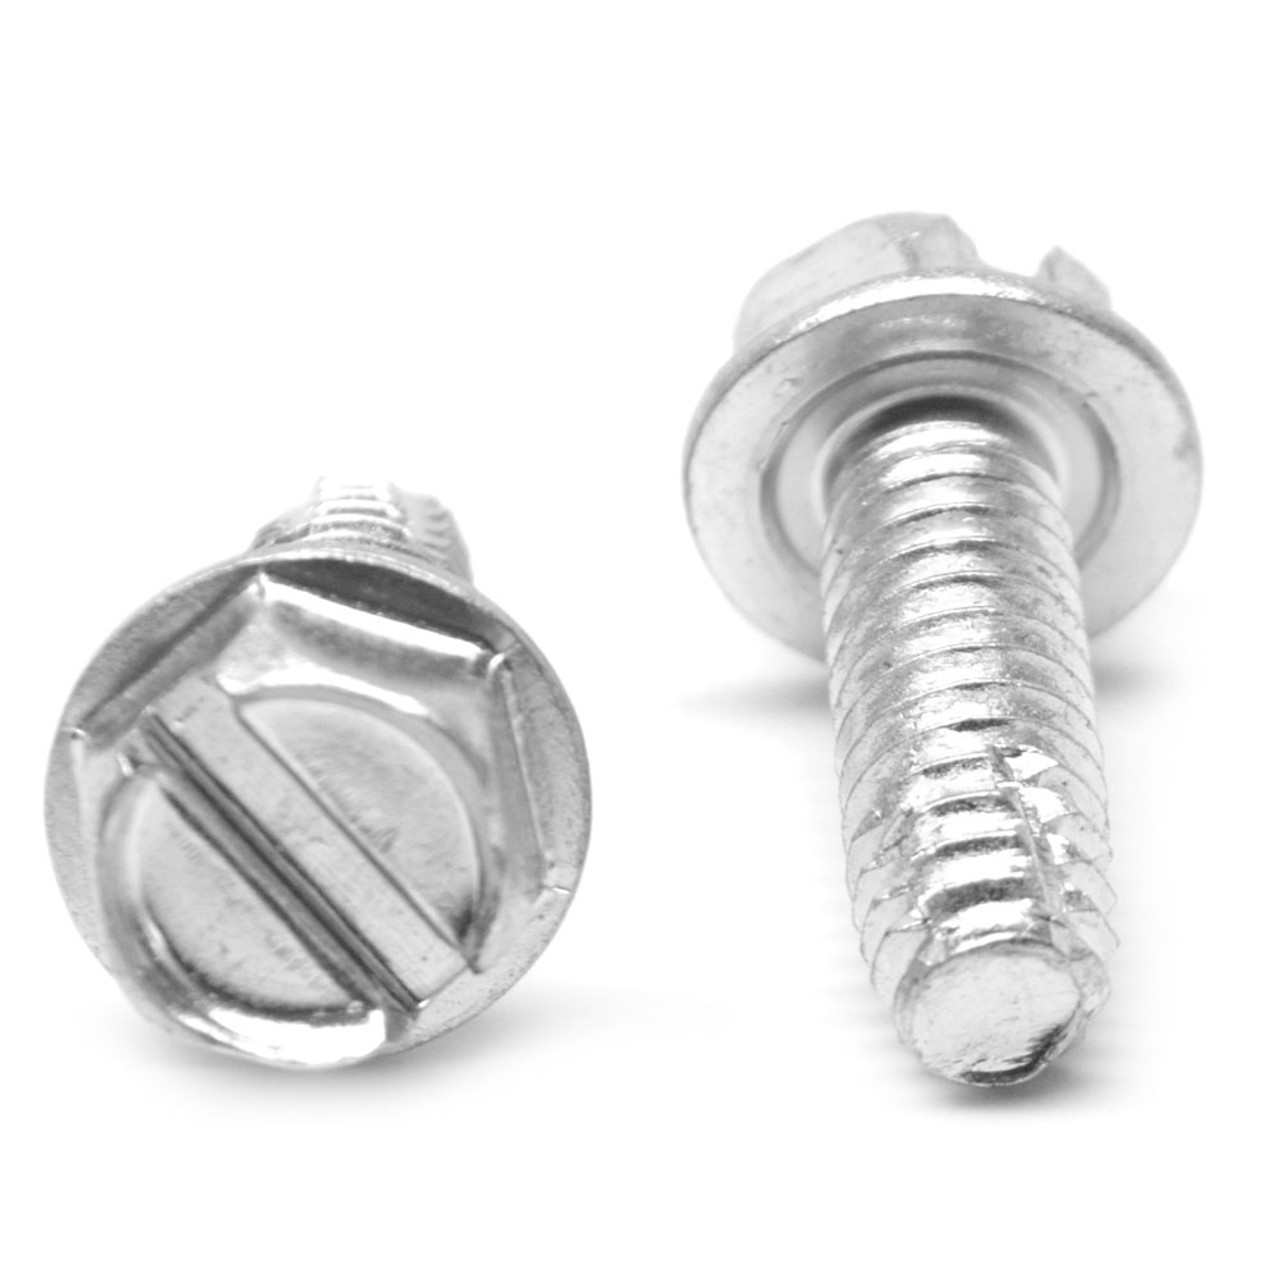 1/4-20 x 1 1/4 Coarse Thread Thread Cutting Screw Slotted Hex Washer Head Type F Low Carbon Steel Zinc Plated